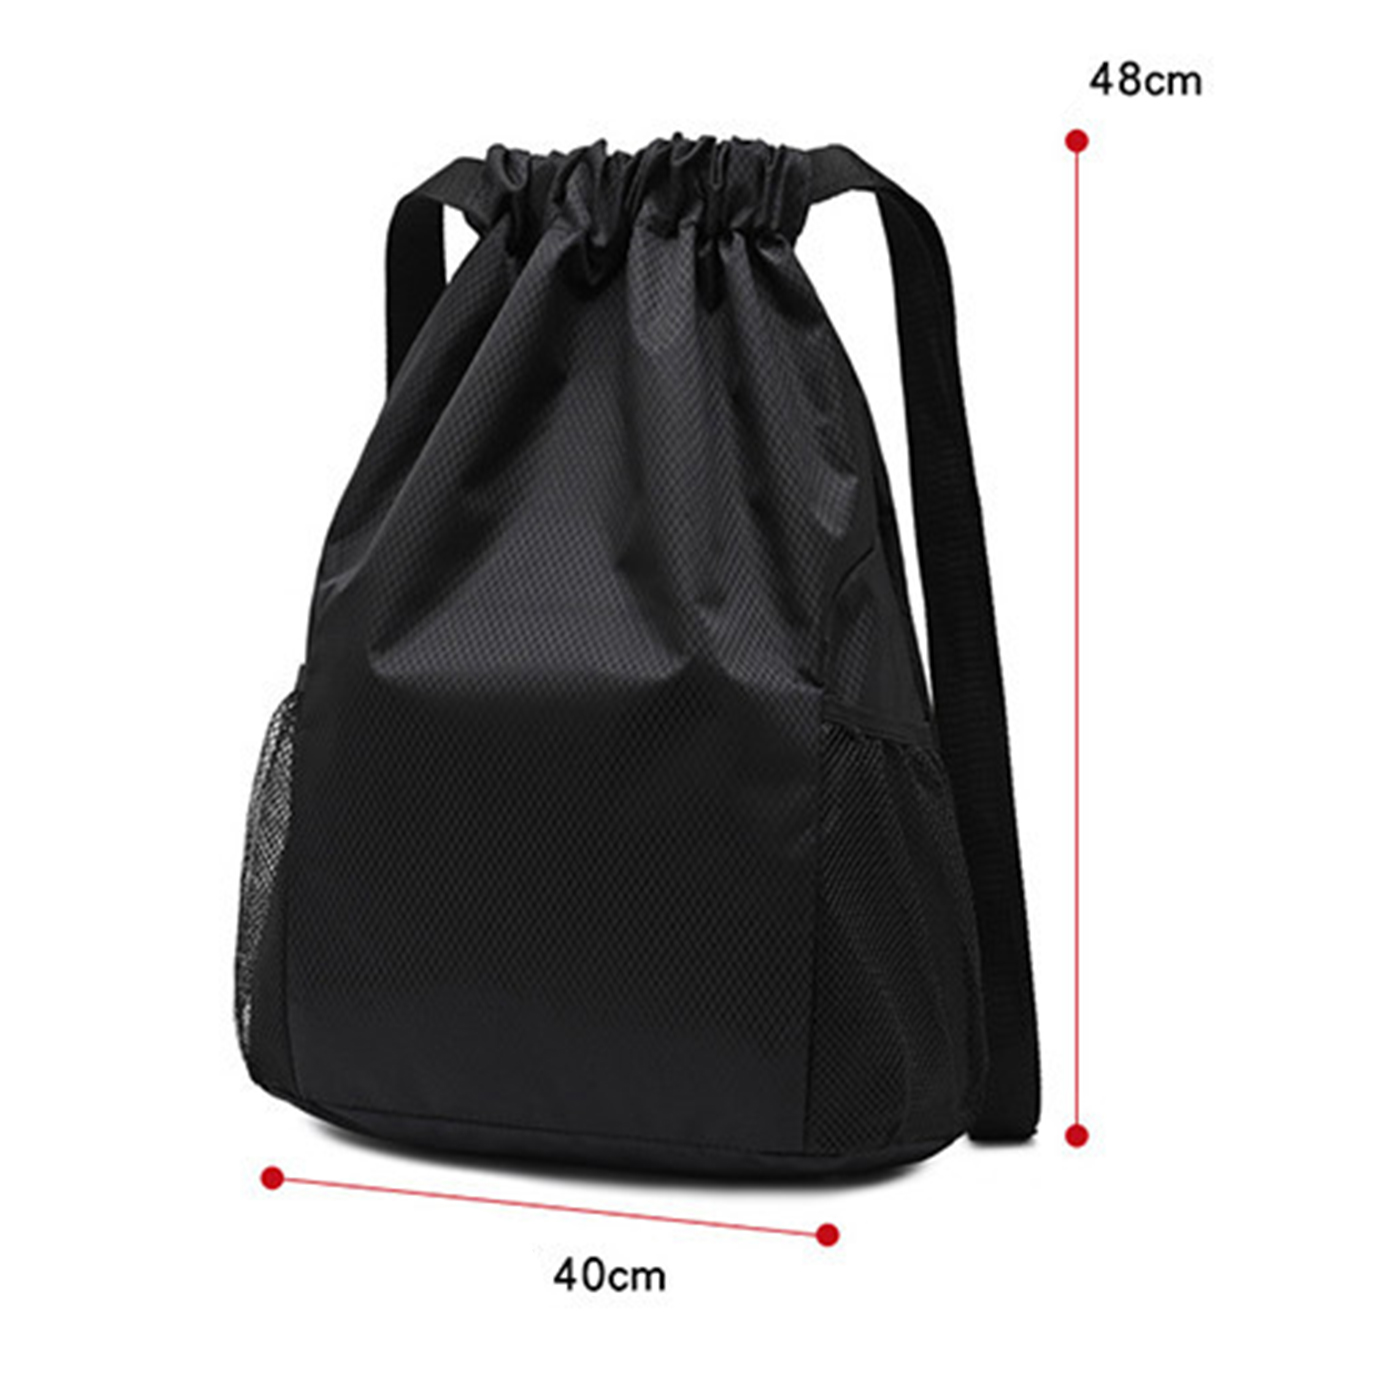 Drawstring Backpack With Water Pocket2